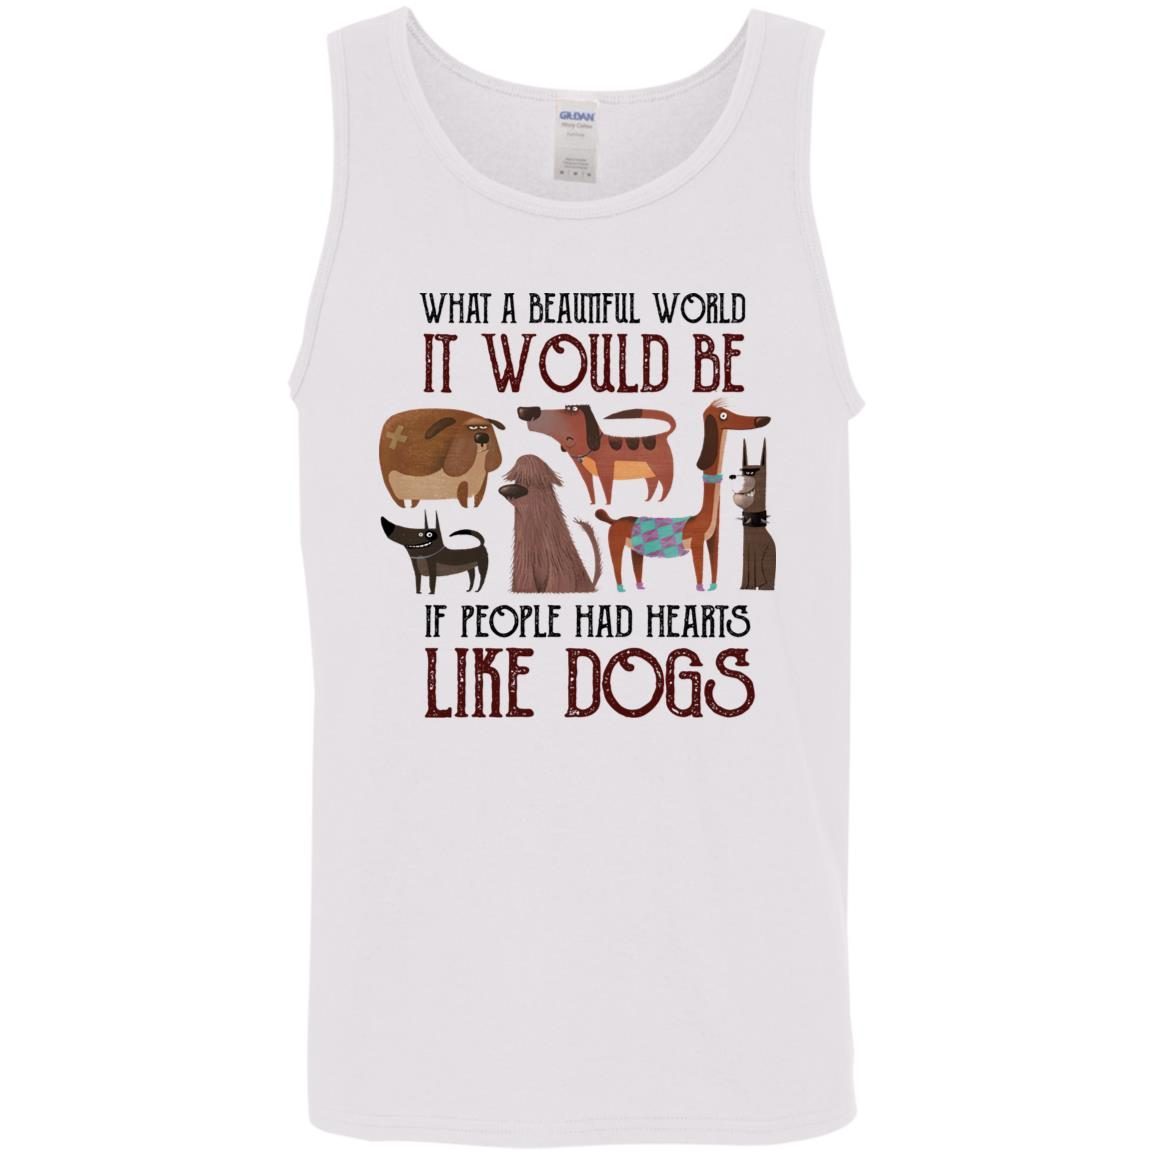 What A Beautiful World It Would Be If People Had Hearts Like Dogs shirt 6